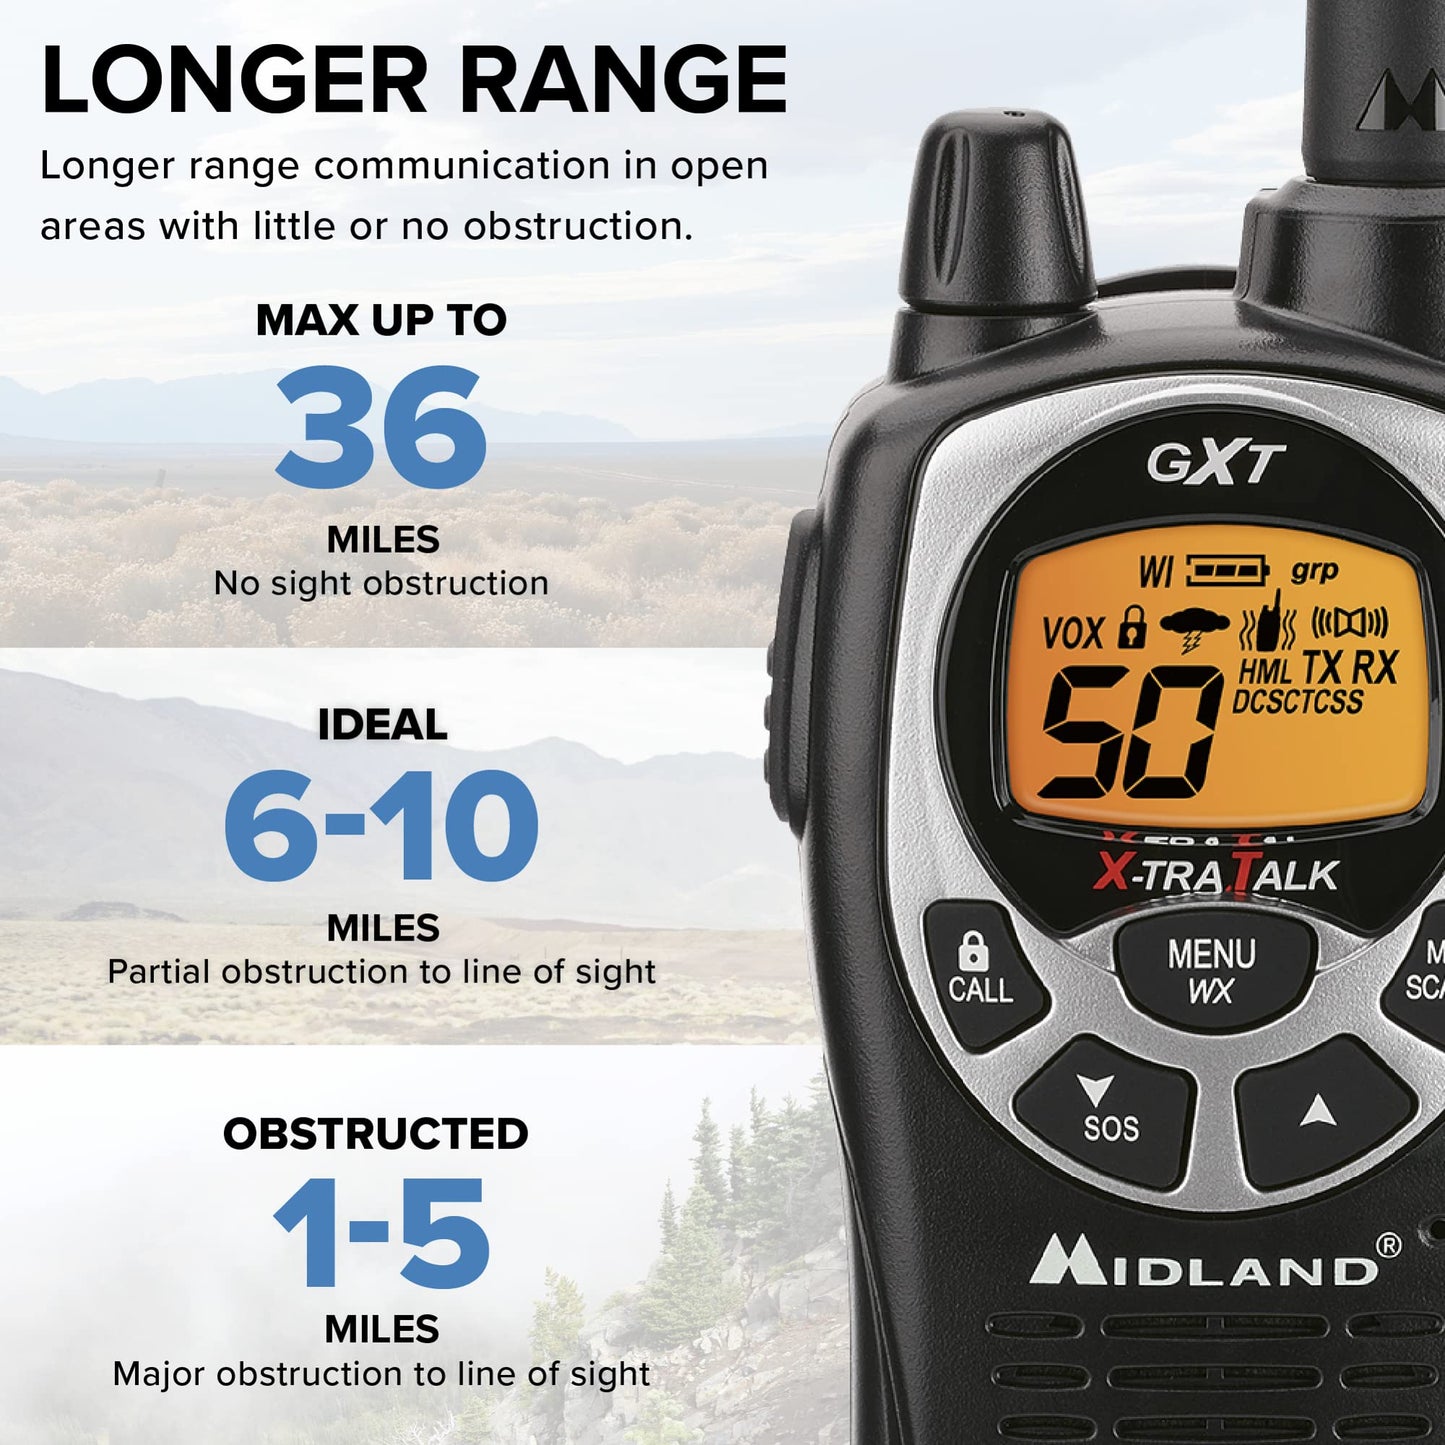 Midland GXT1000VP4 - 50 Channel GMRS Two-Way Radios (Black/Silver)(Pair)